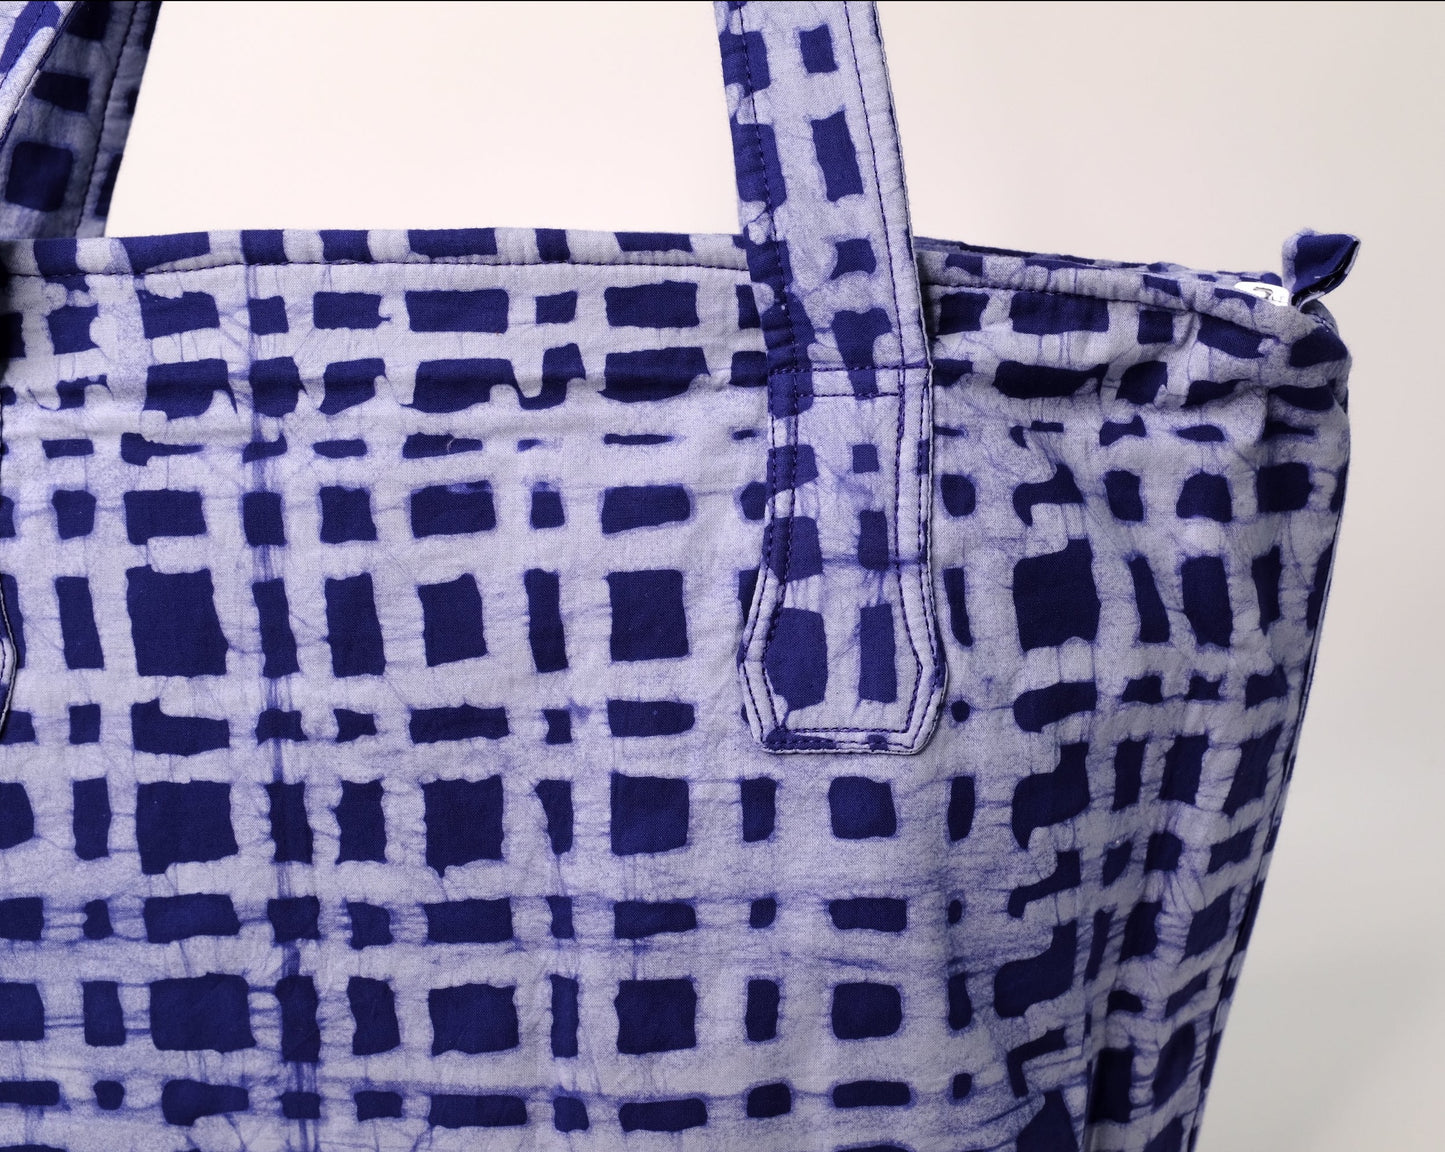 Organic Study Bag in Plaid and Navy fabric